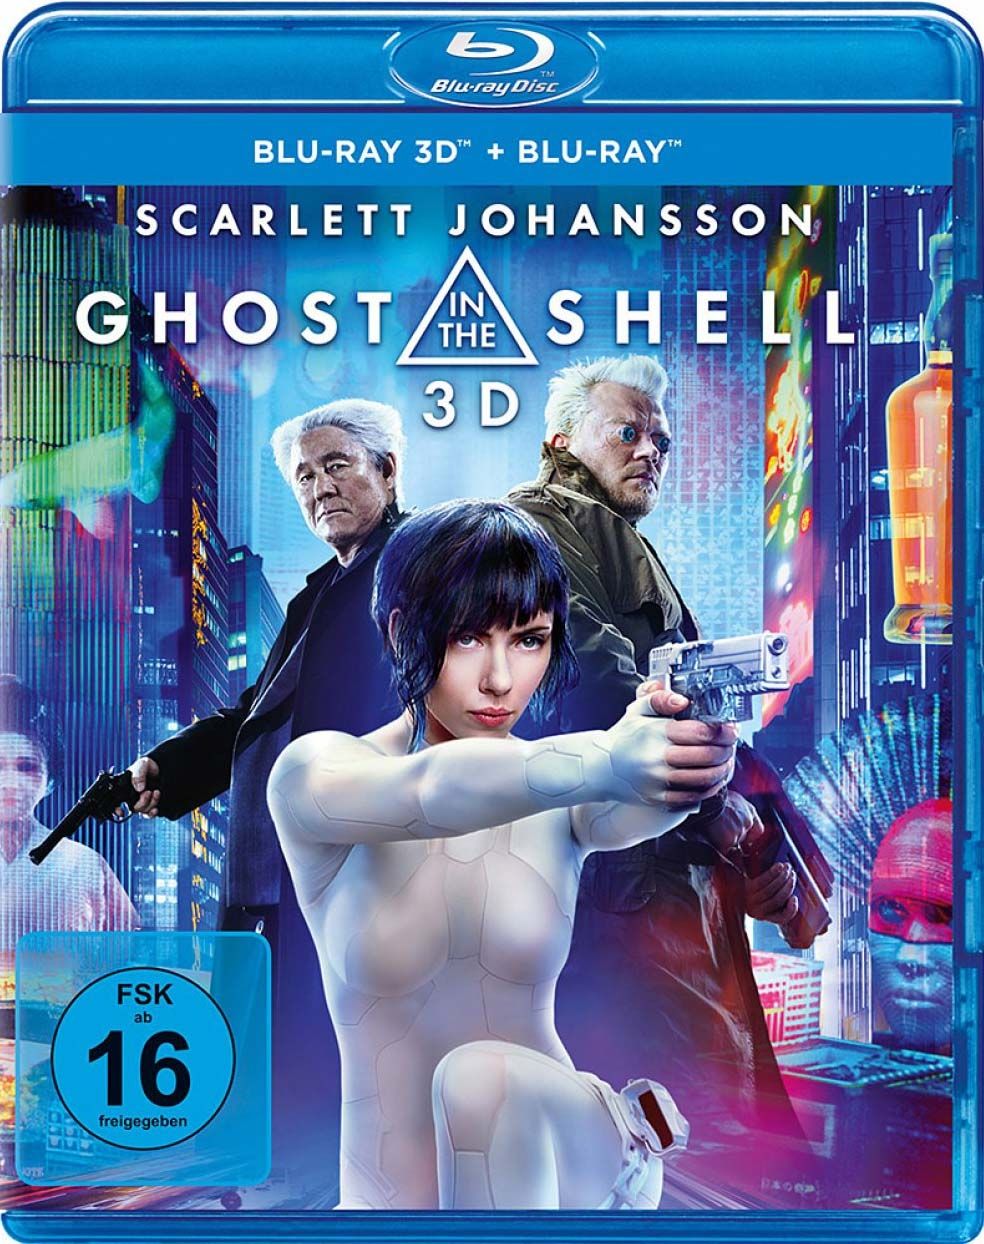 Ghost in the Shell (2017) (2 Discs) (BLURAY 3D + BLURAY)